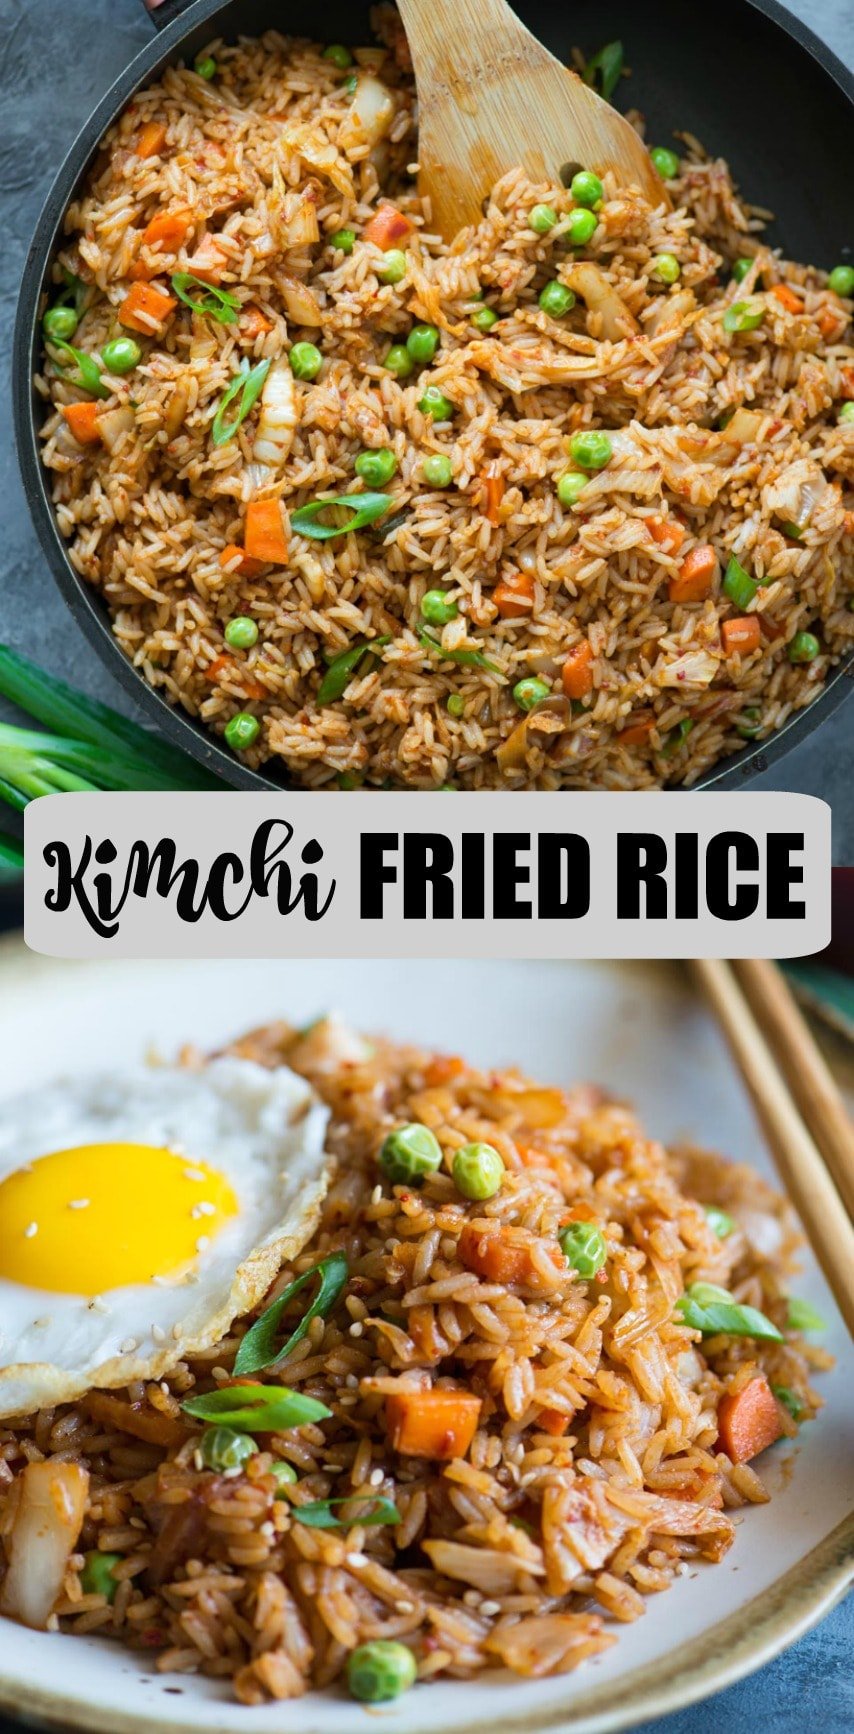 Collage pin of Kimchi Fried rice images - Top image of fried rice made in a pan & bottom image of kimchi fried rice plated with sunny side up and chopsticks